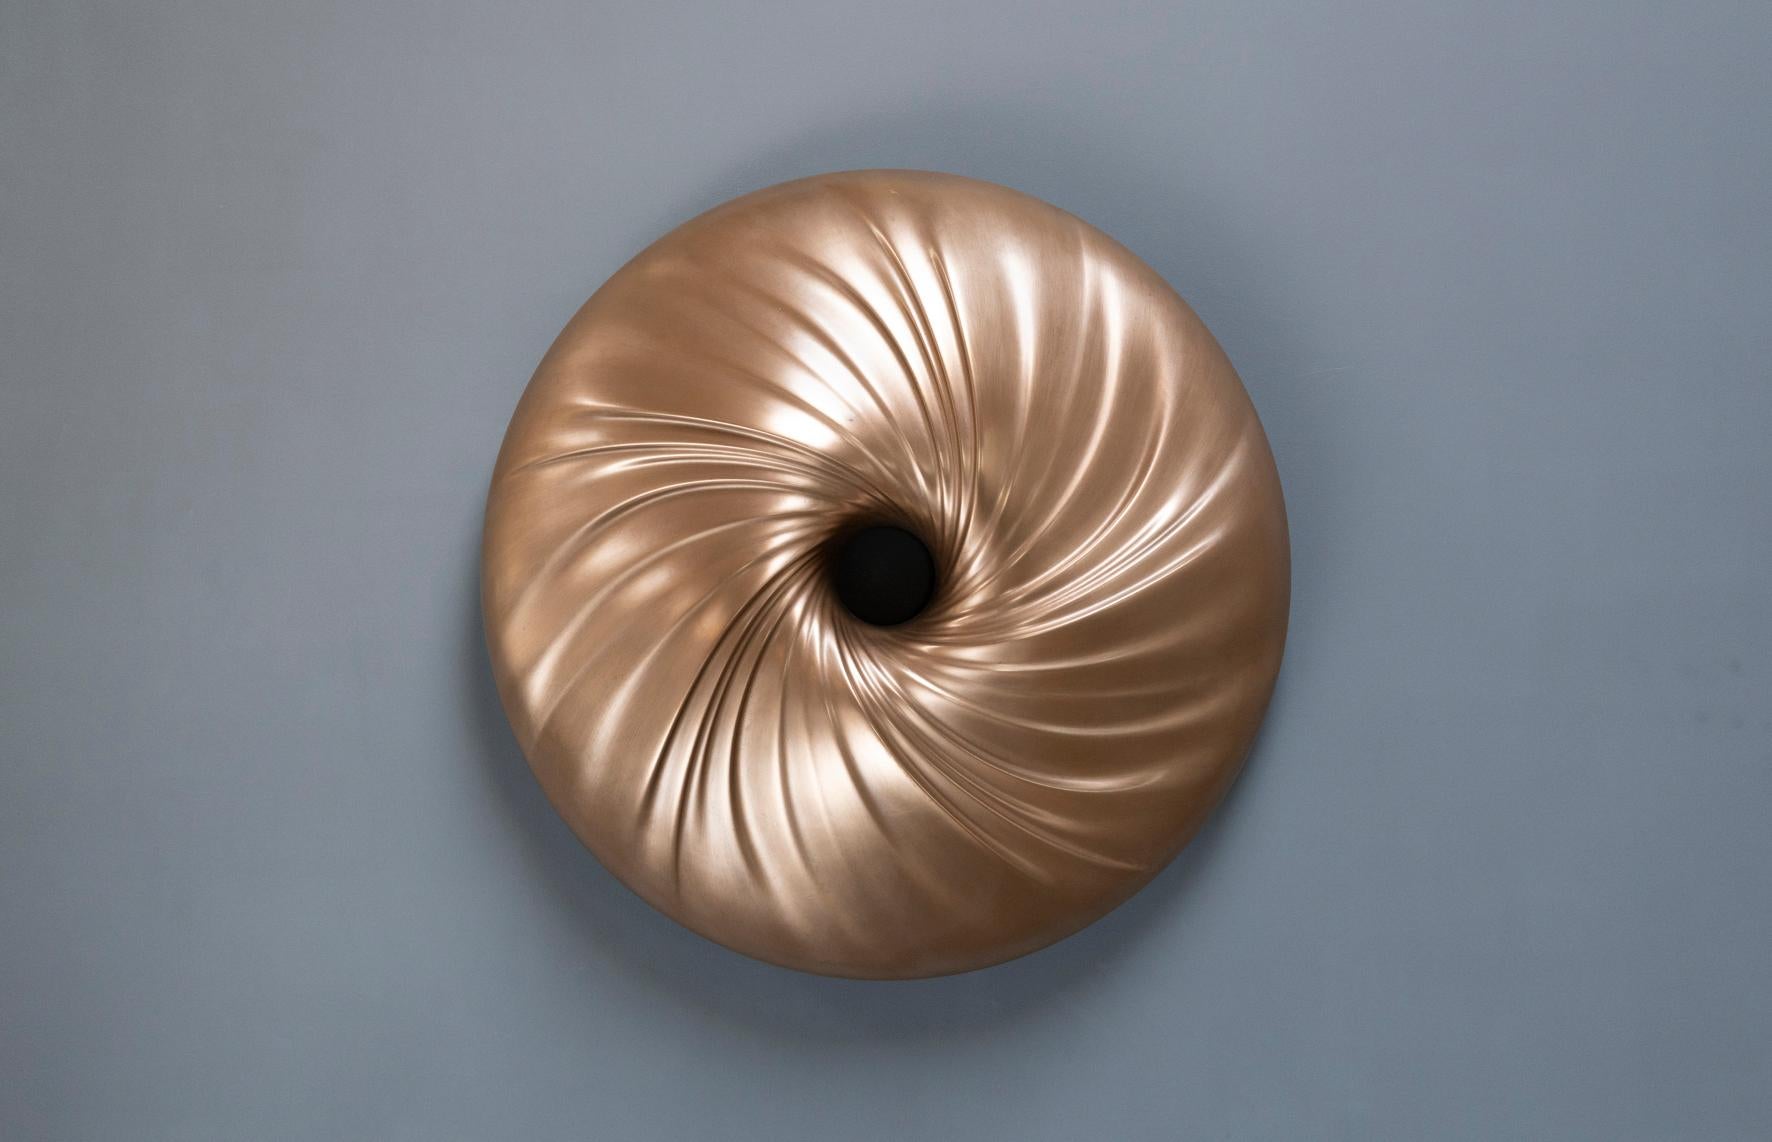 This limited edition of twelve wall mounted bronze sculptures is inspired by a fascinating natural phenomenon. In a maelstrom, hidden forces are in play in an alluring dance choreographed by the power of Mother Nature. The calmness at the smooth